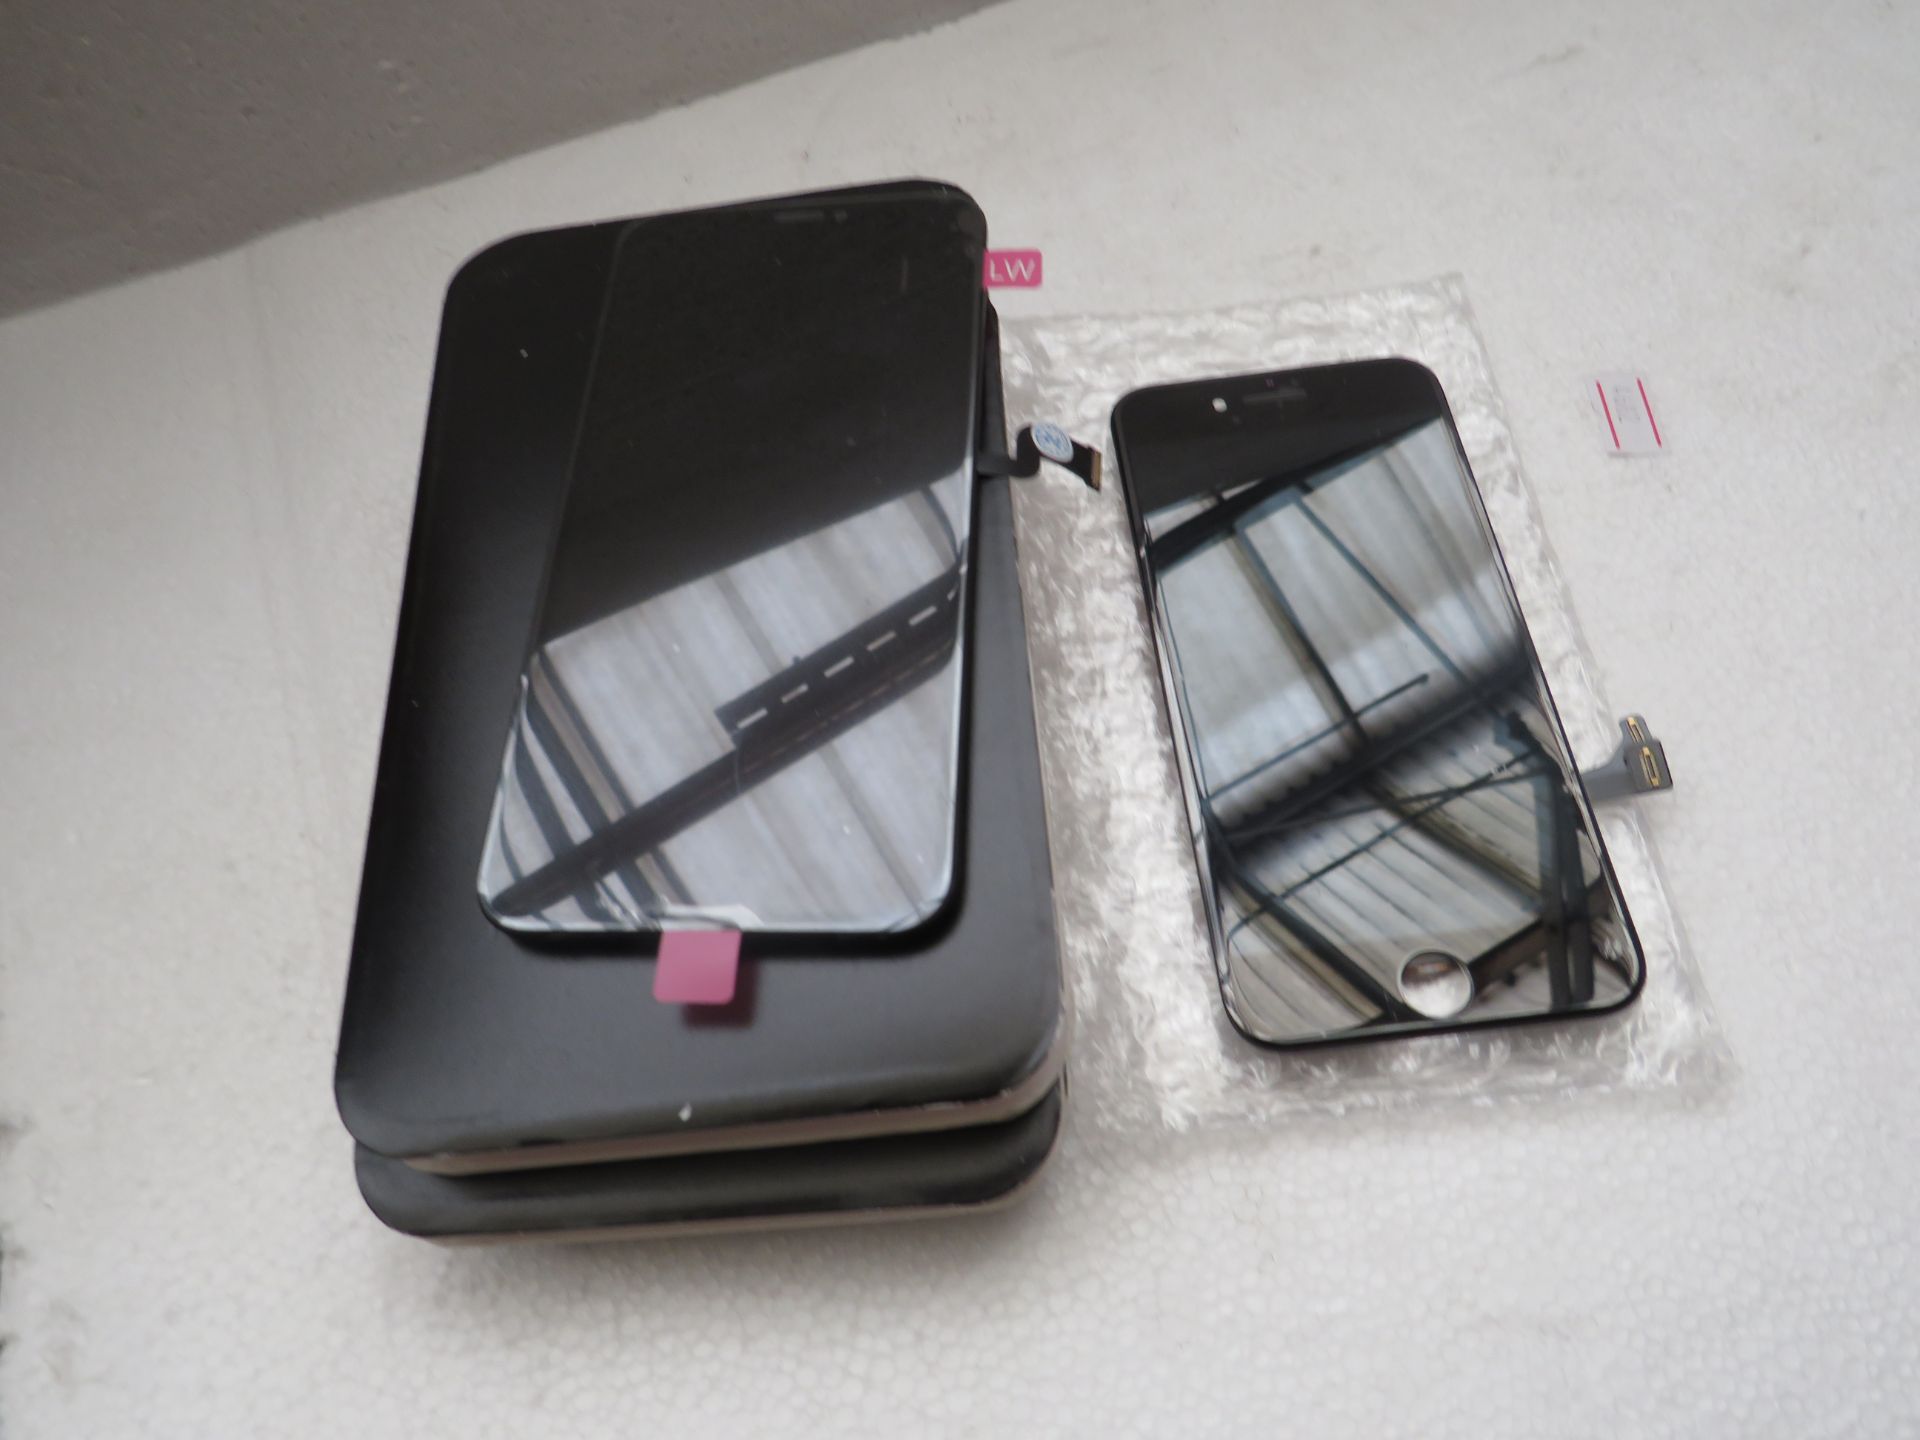 4x Phone screen replacements, designs may vary, new and boxed.